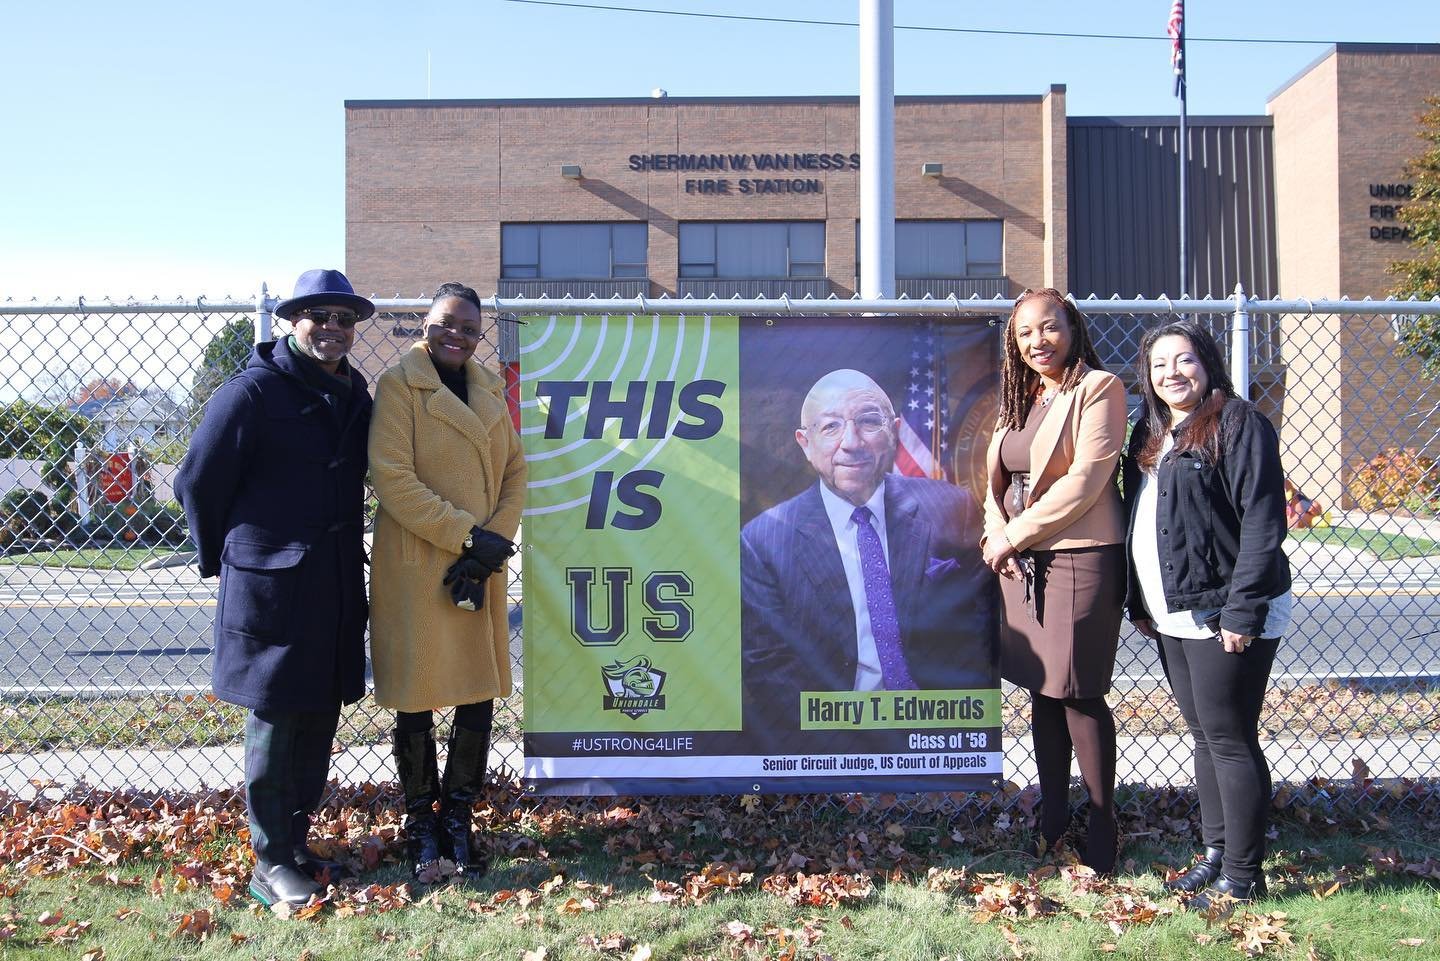 The family of Hon. Harry T. Edwards celebrated his induction into the Uniondale School District Wall of Fame.